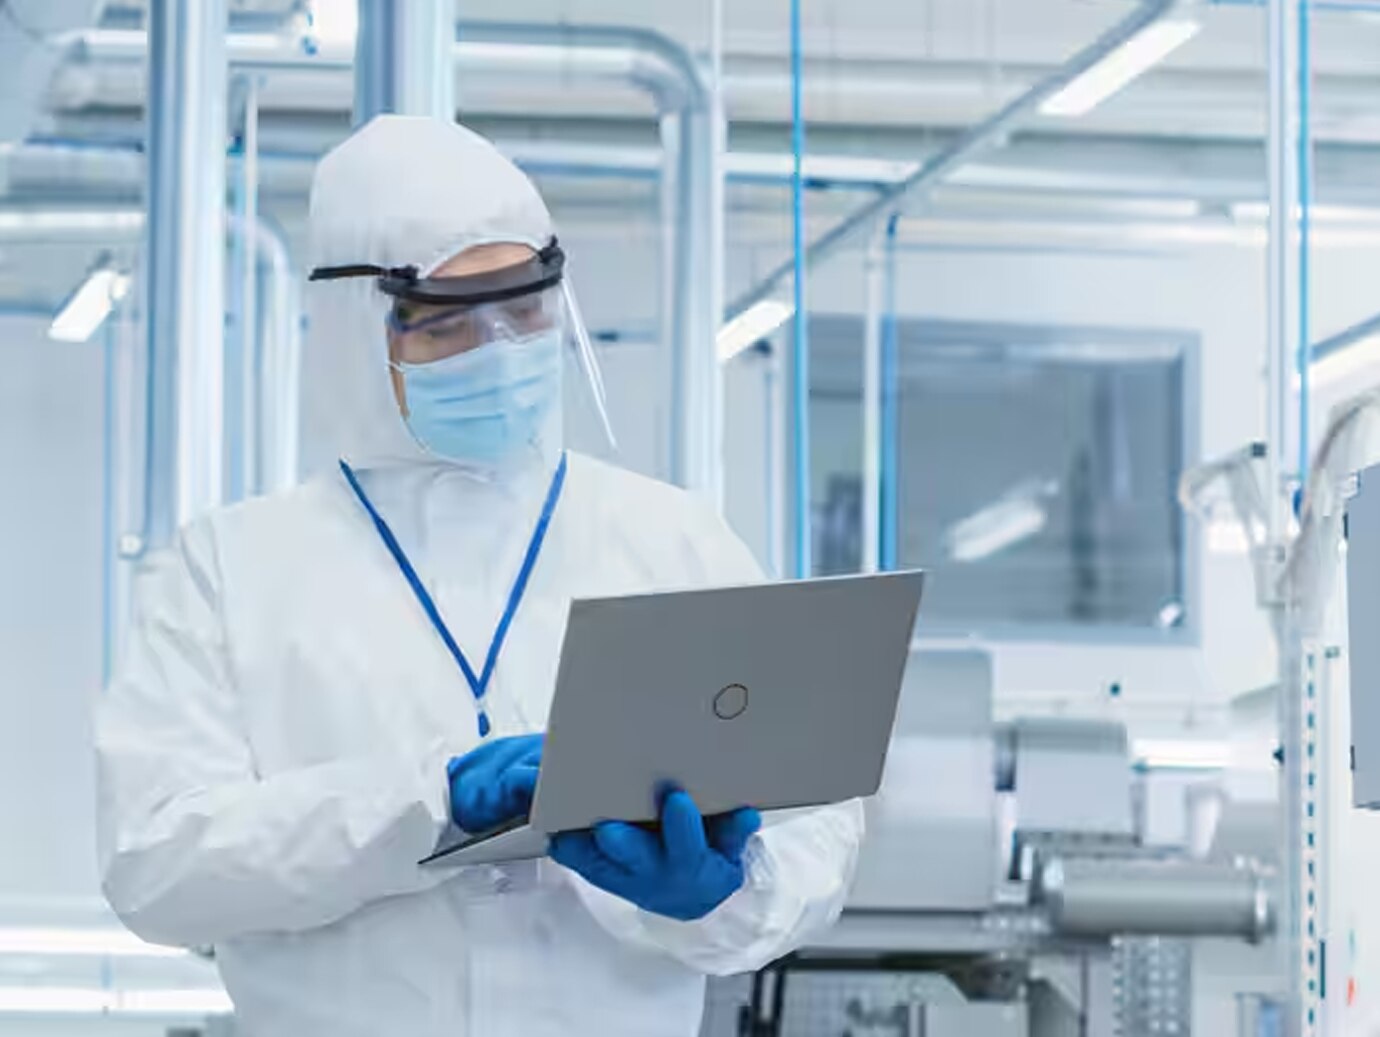 A researcher in protective clothing and mask working on a laptop